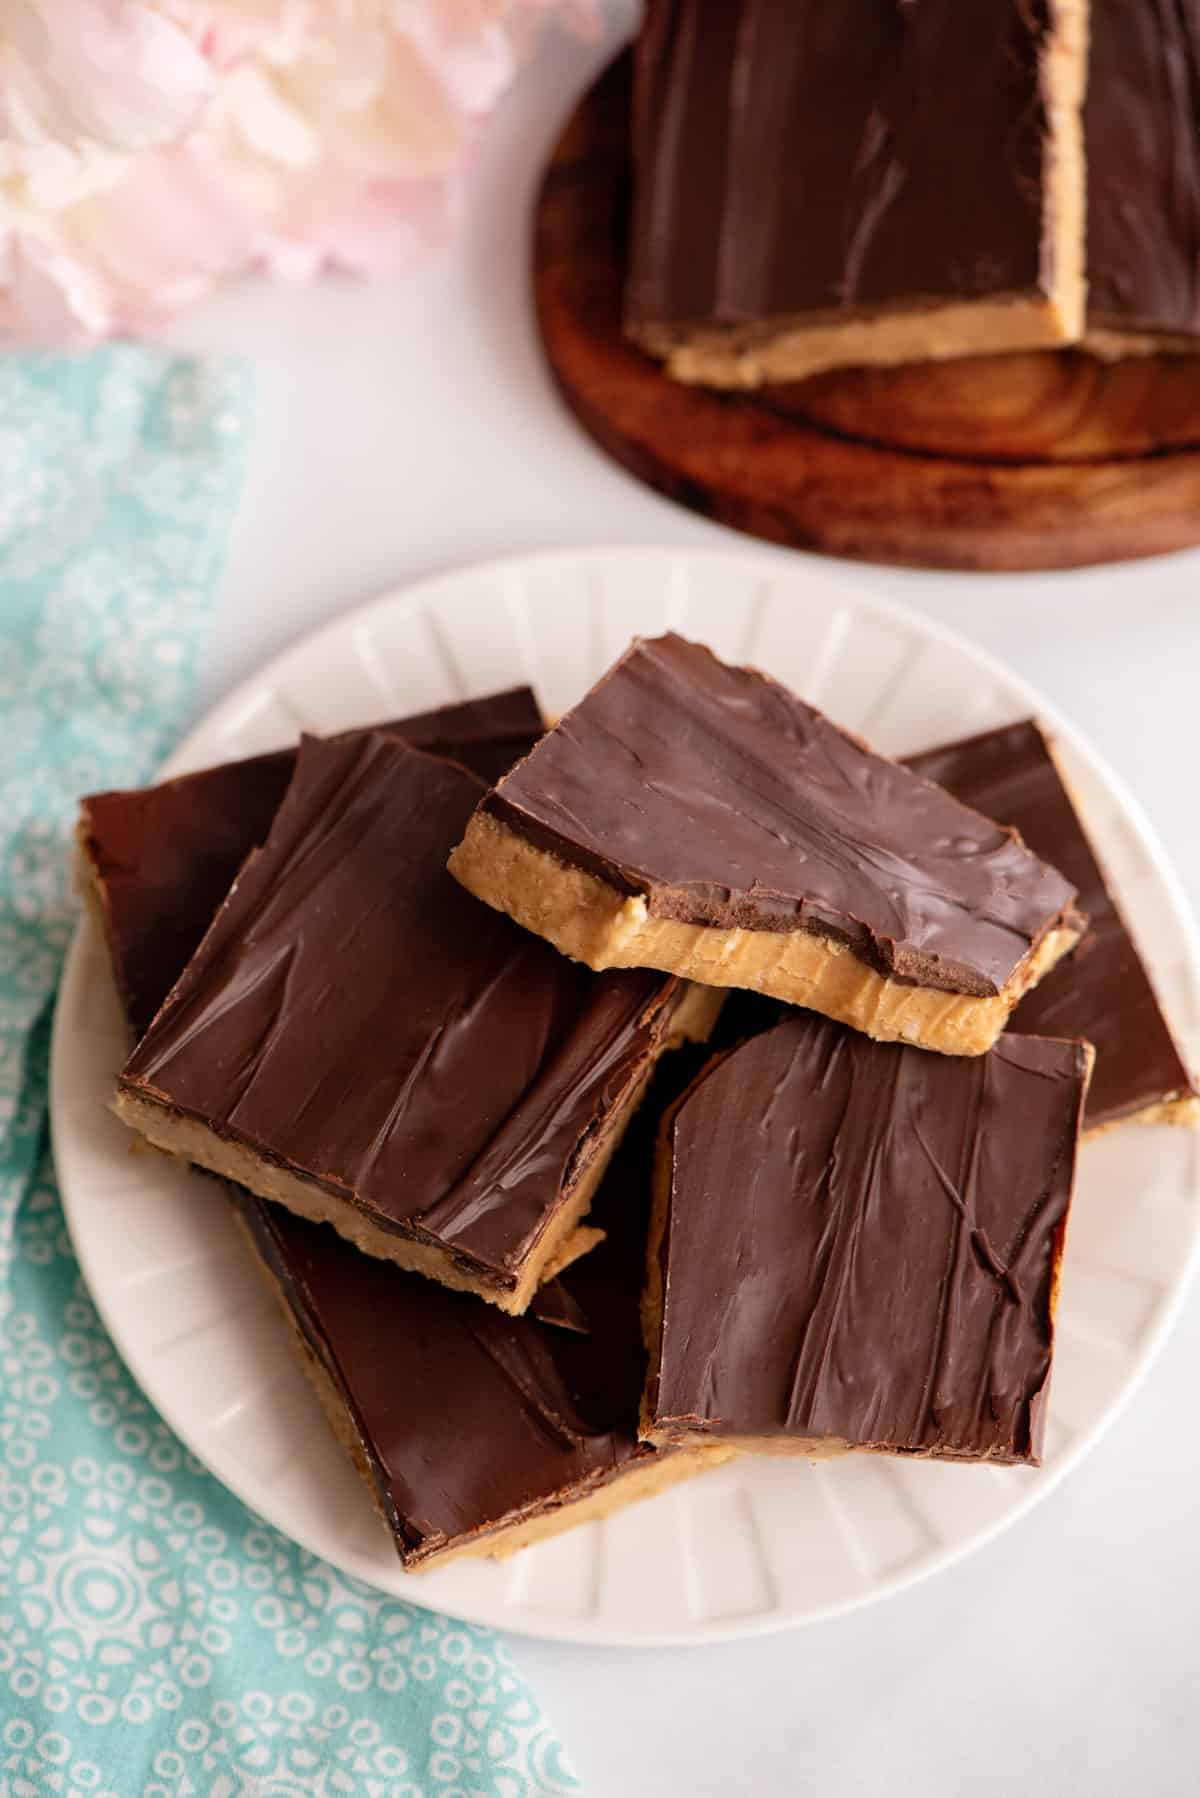 Plate of no-bake peanut butter bars.